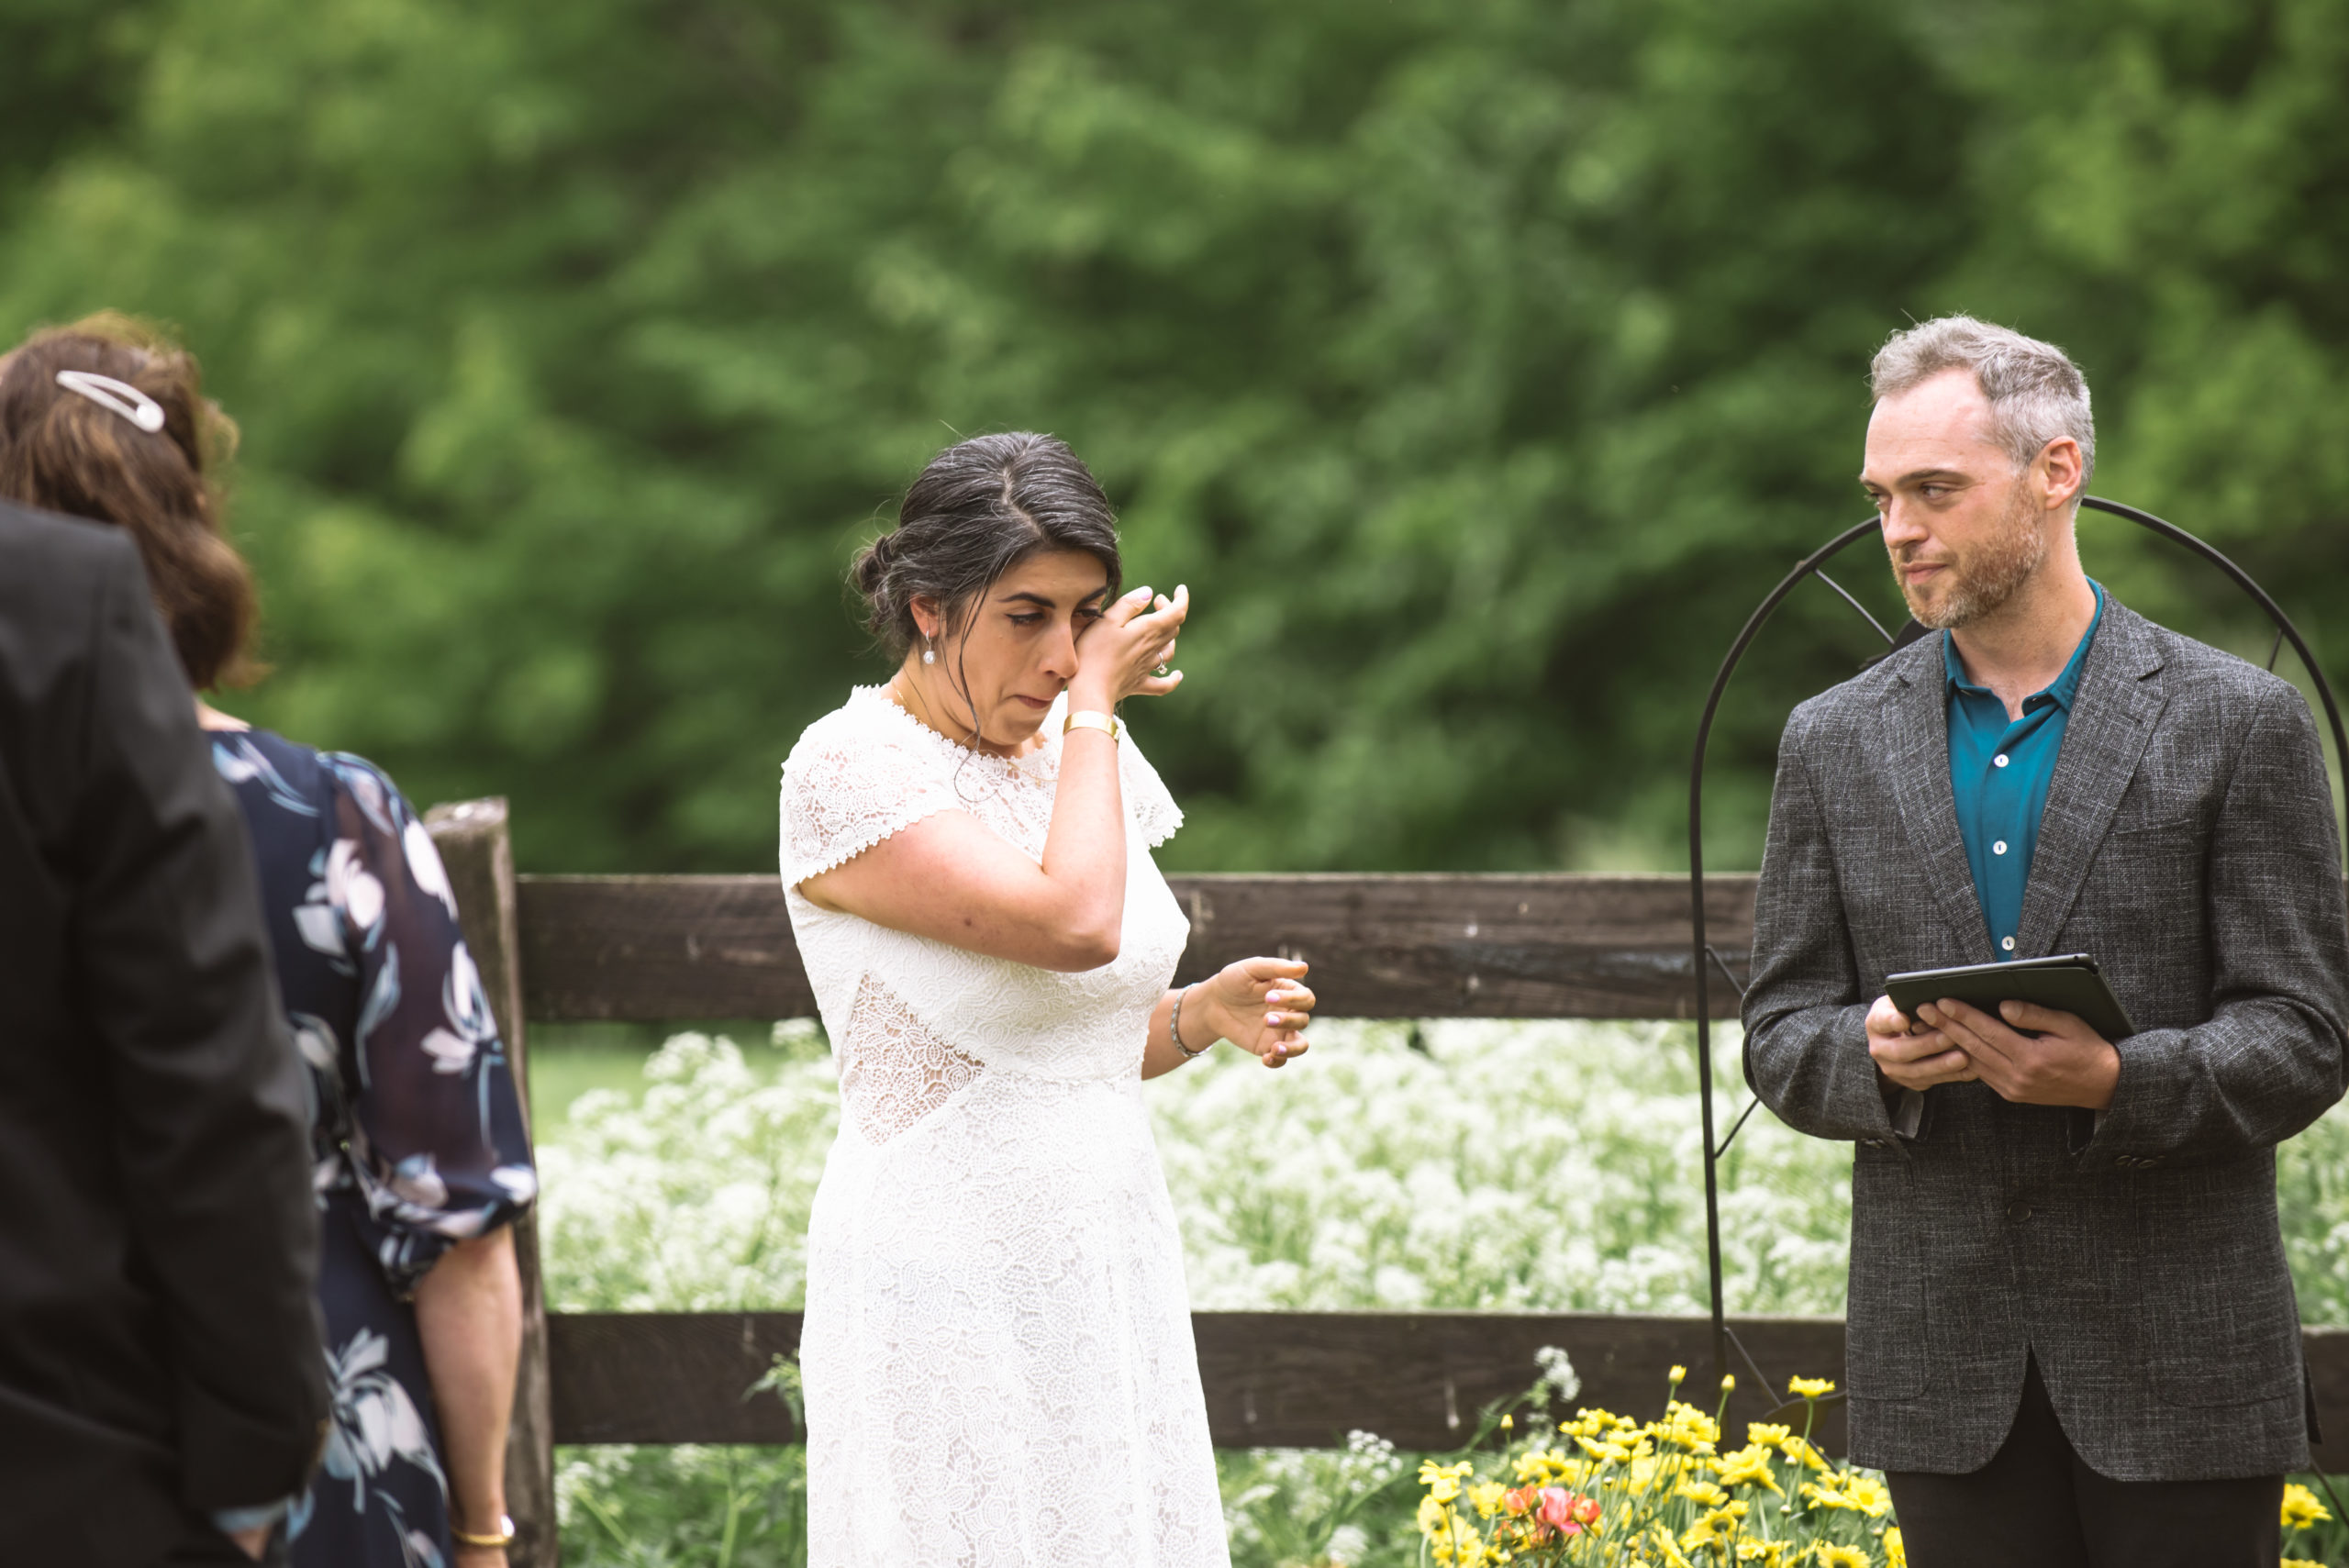 Bride wiping away tears during the ceremony. The officiant is holding an electronic tablet and is looking over at the bride. They are standing in front of a dark wooden fence with lots of white wildflowers in the field. There are trees in the background.